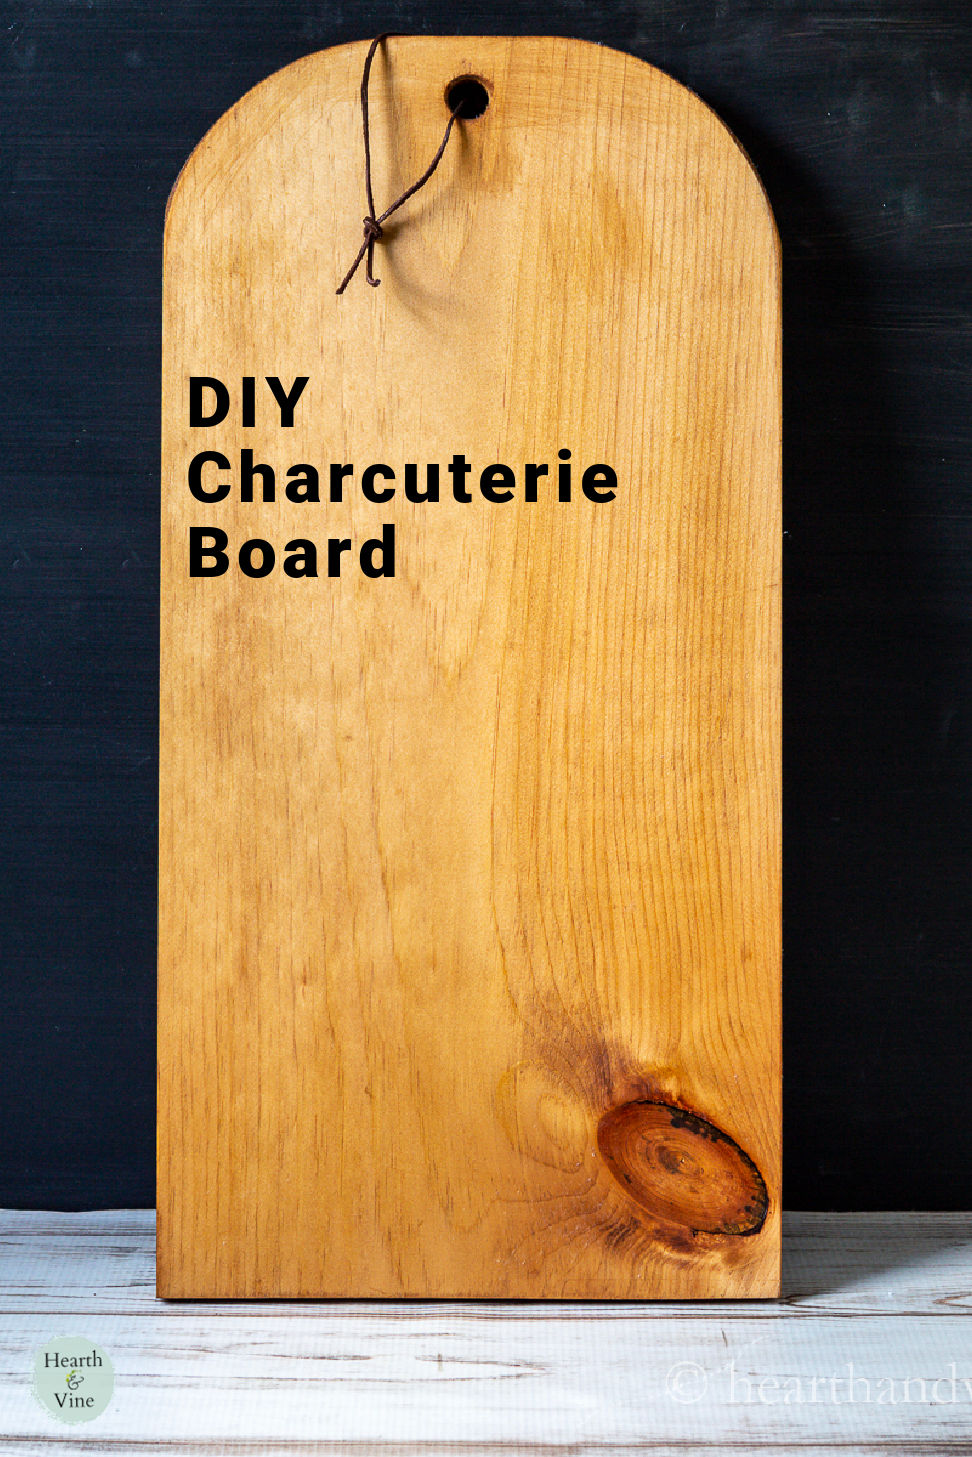 Large handmade charcuterie board with a rounded edge and hole for hanging.